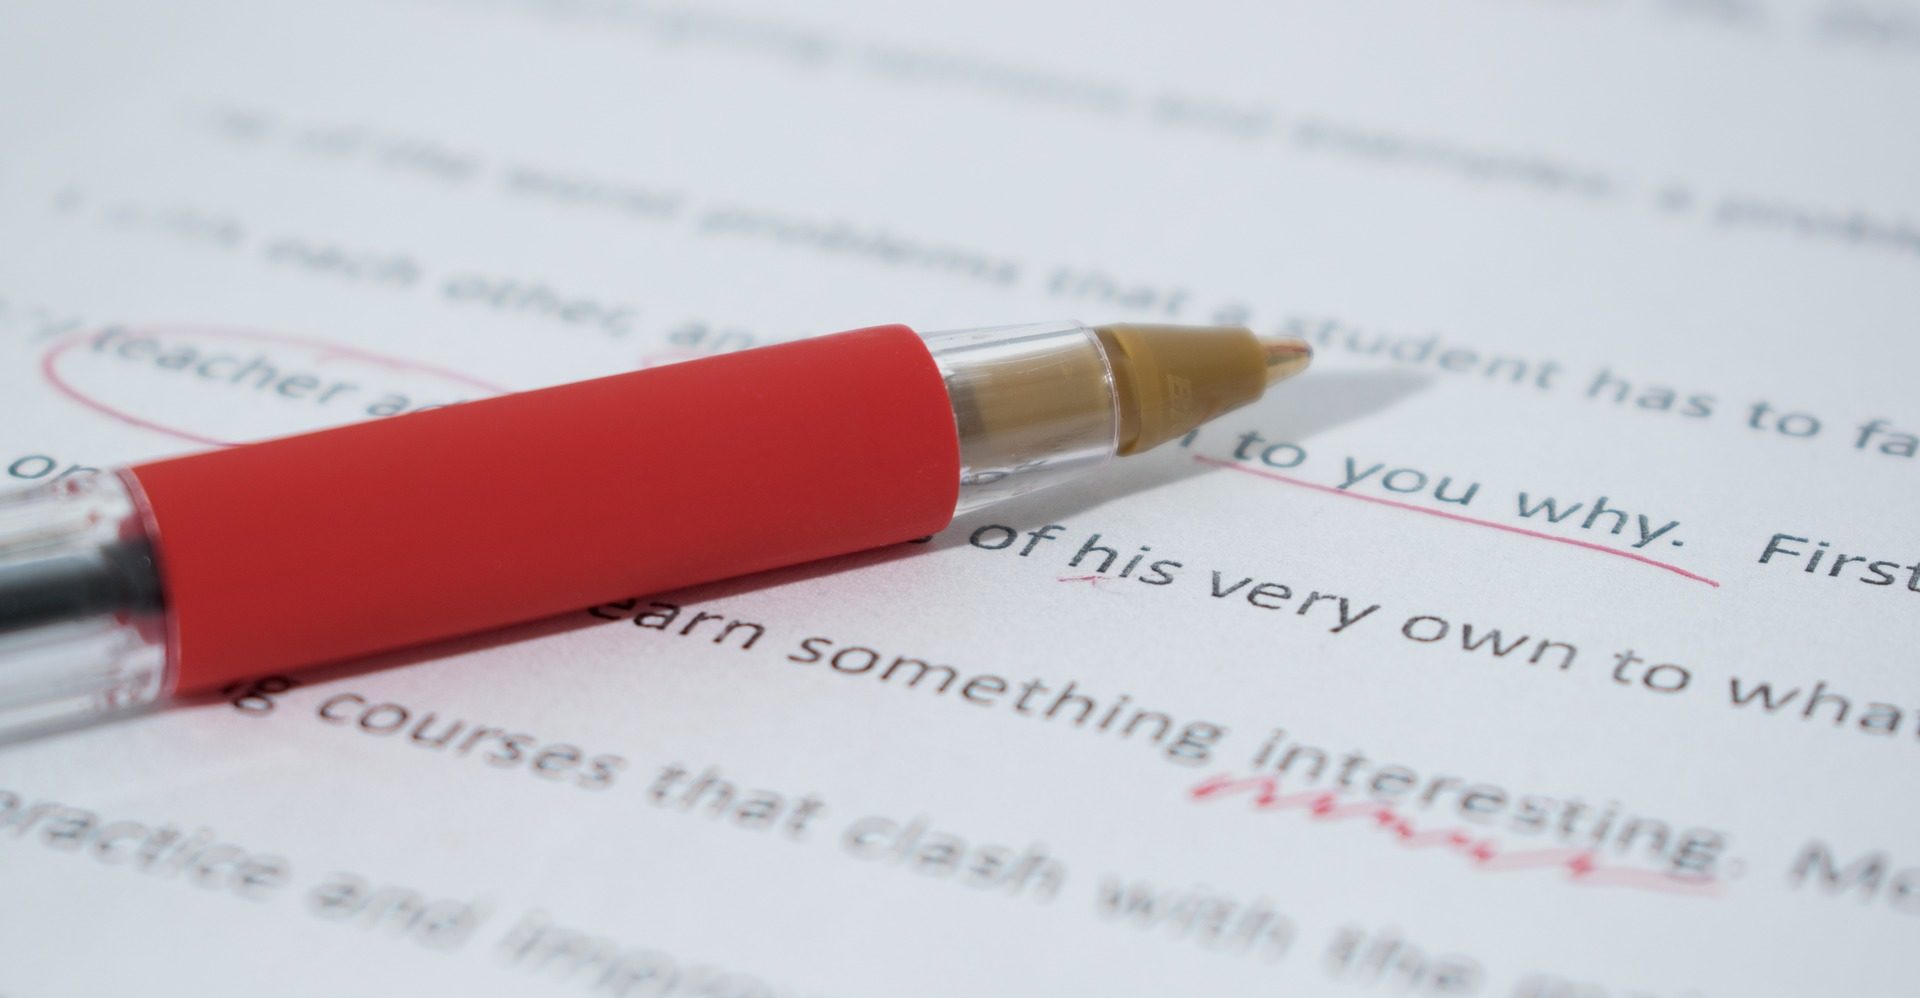 A red pen on a document with some mistakes which have been corrected